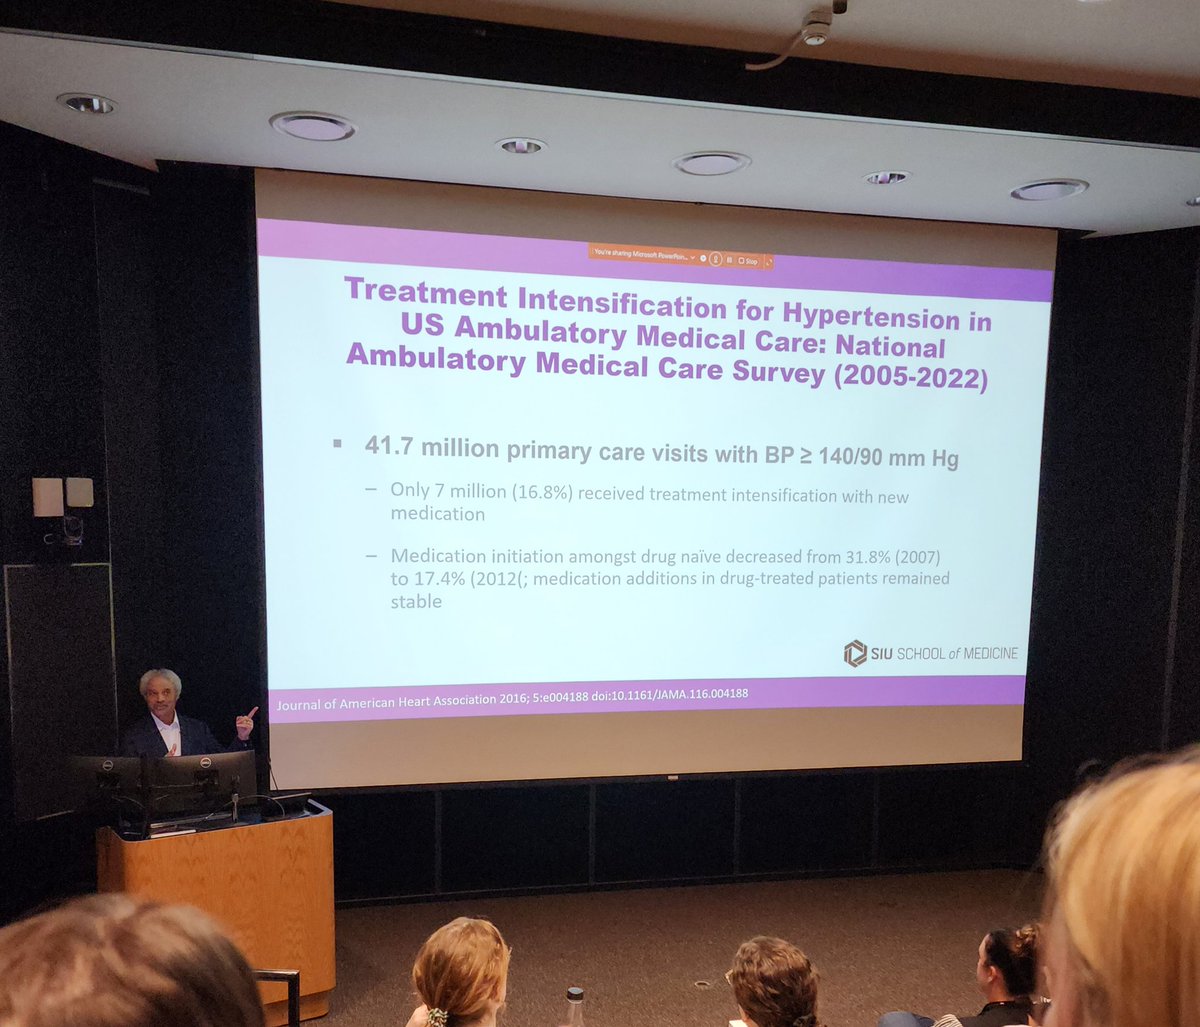 Wonderful Grand Round session today - Hypertension Update from Dr. Flack, @siusom Chair of Internal Medicine & VP of American Society of Hypertension. Loving my sub-internship experience!